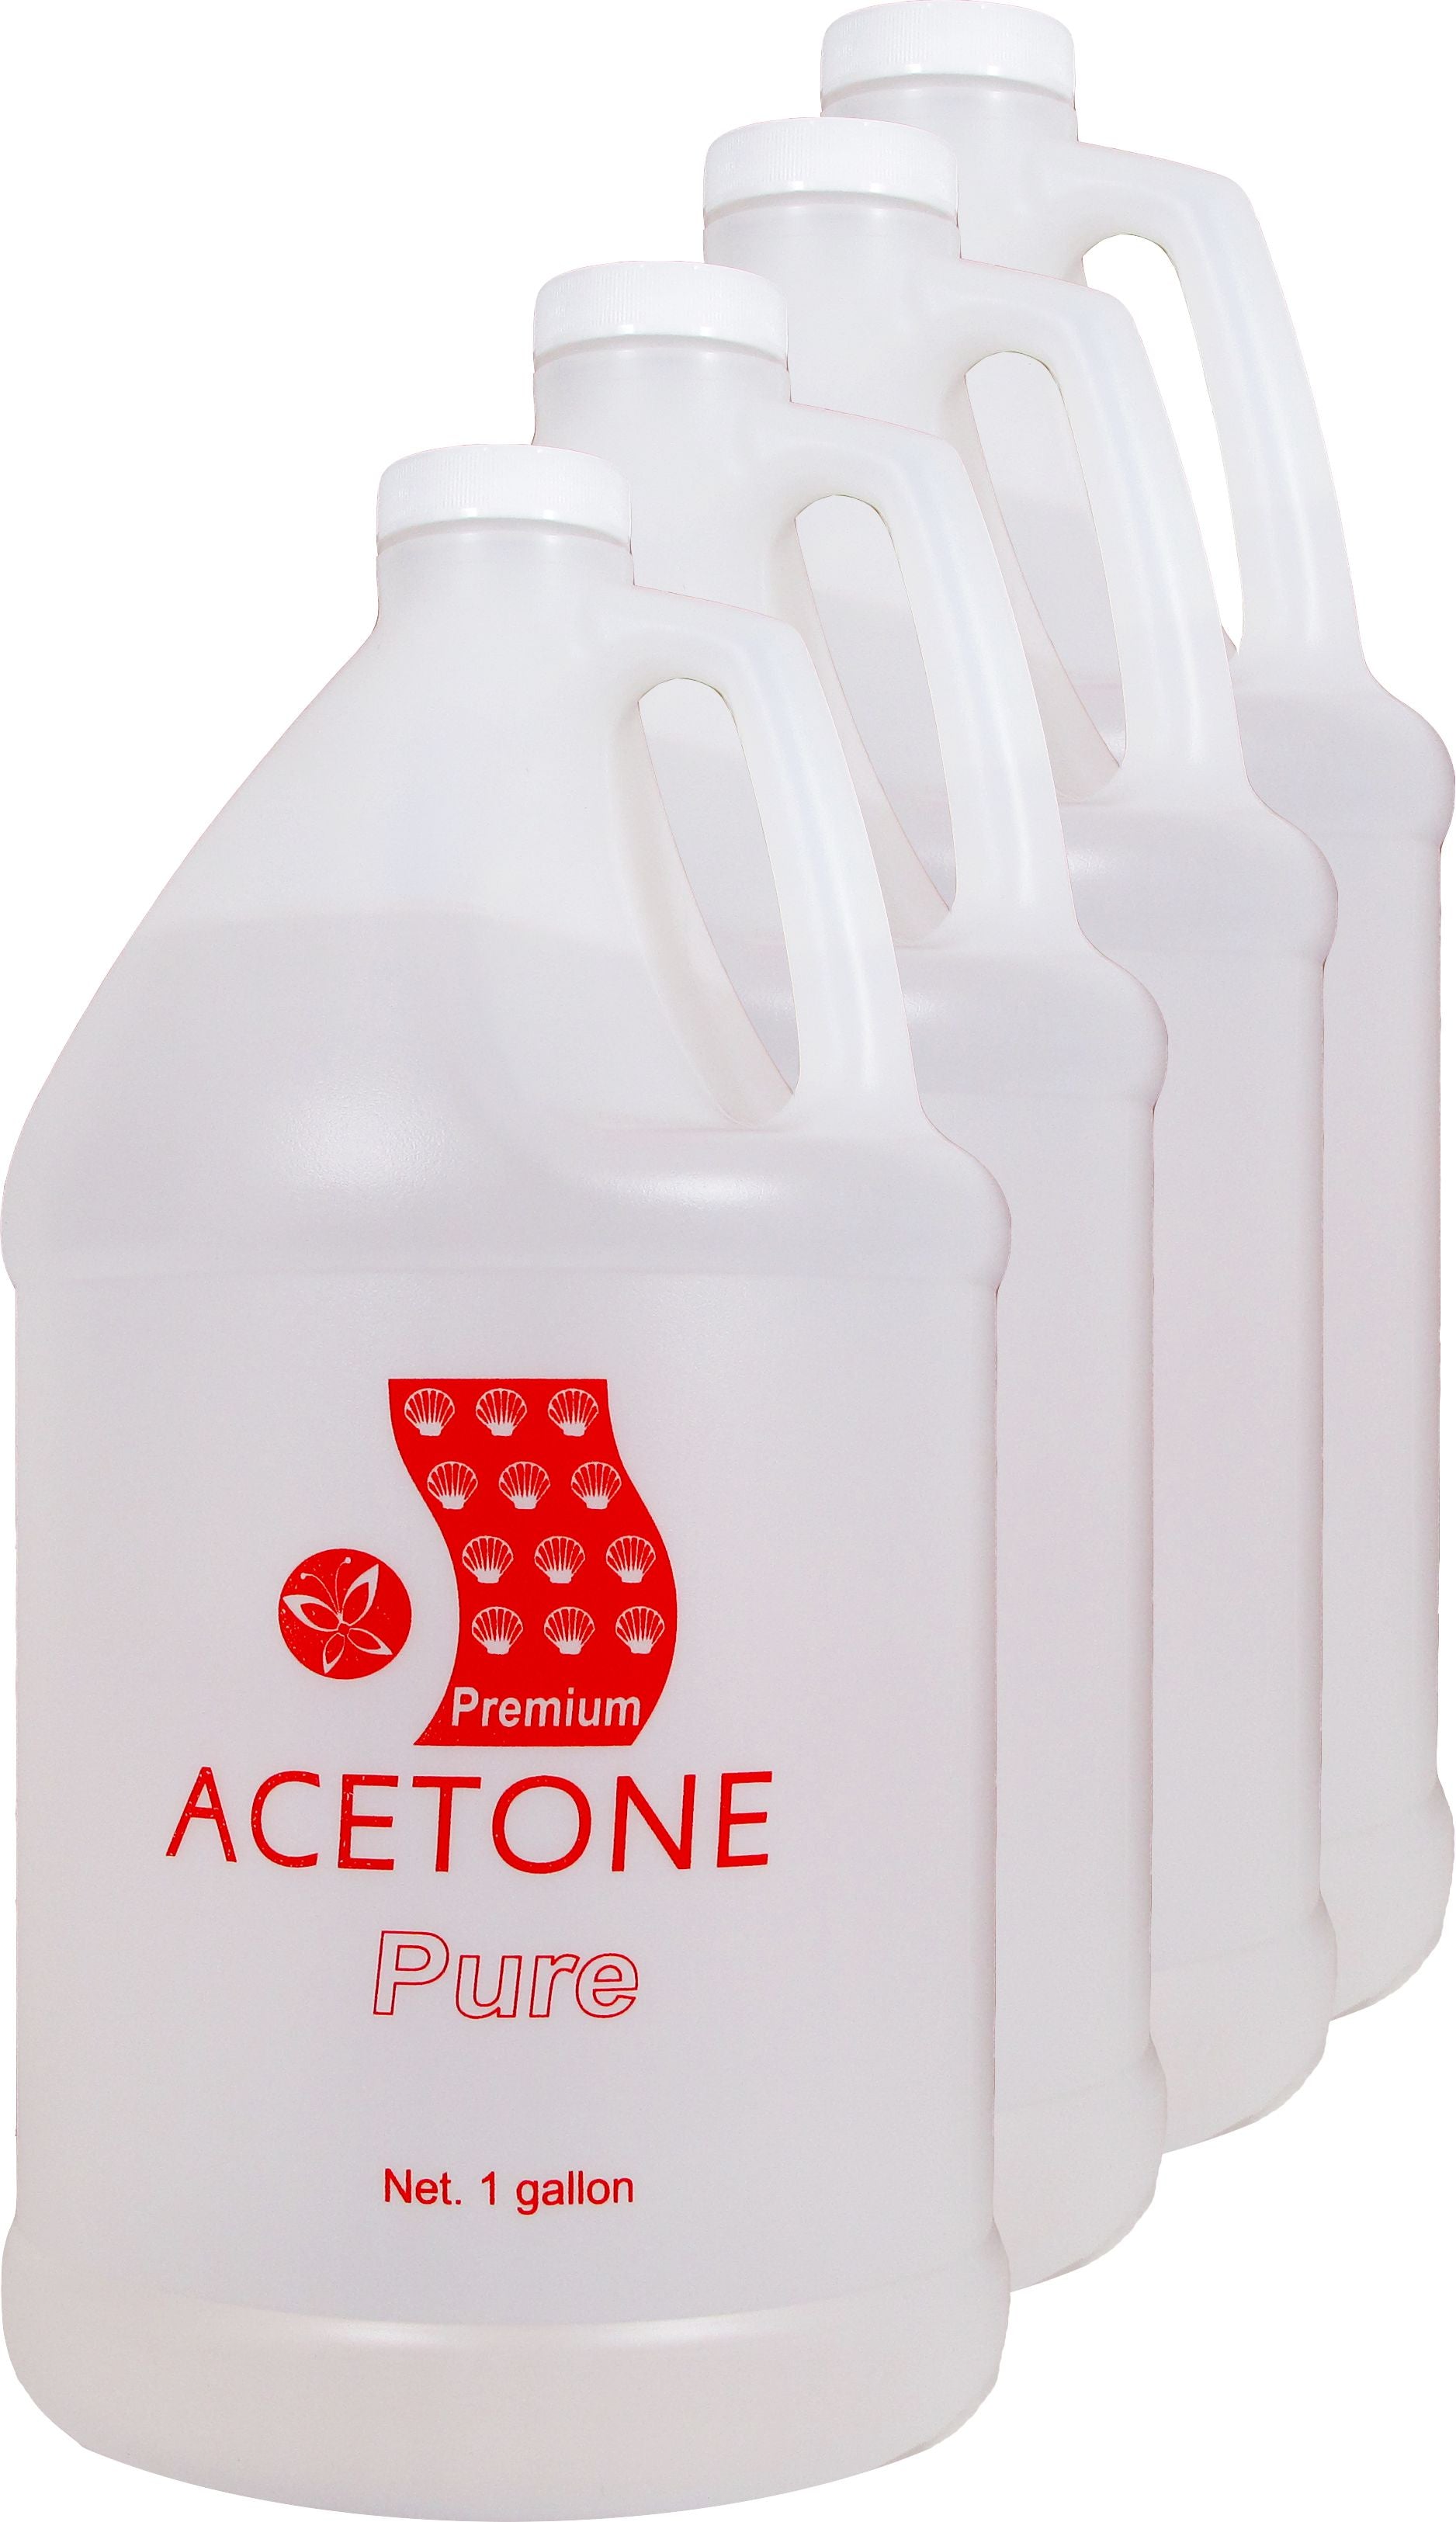 Pro Nail - Pure Acetone / 1 Gallon / Case Pack of 4 (C01P-01720)